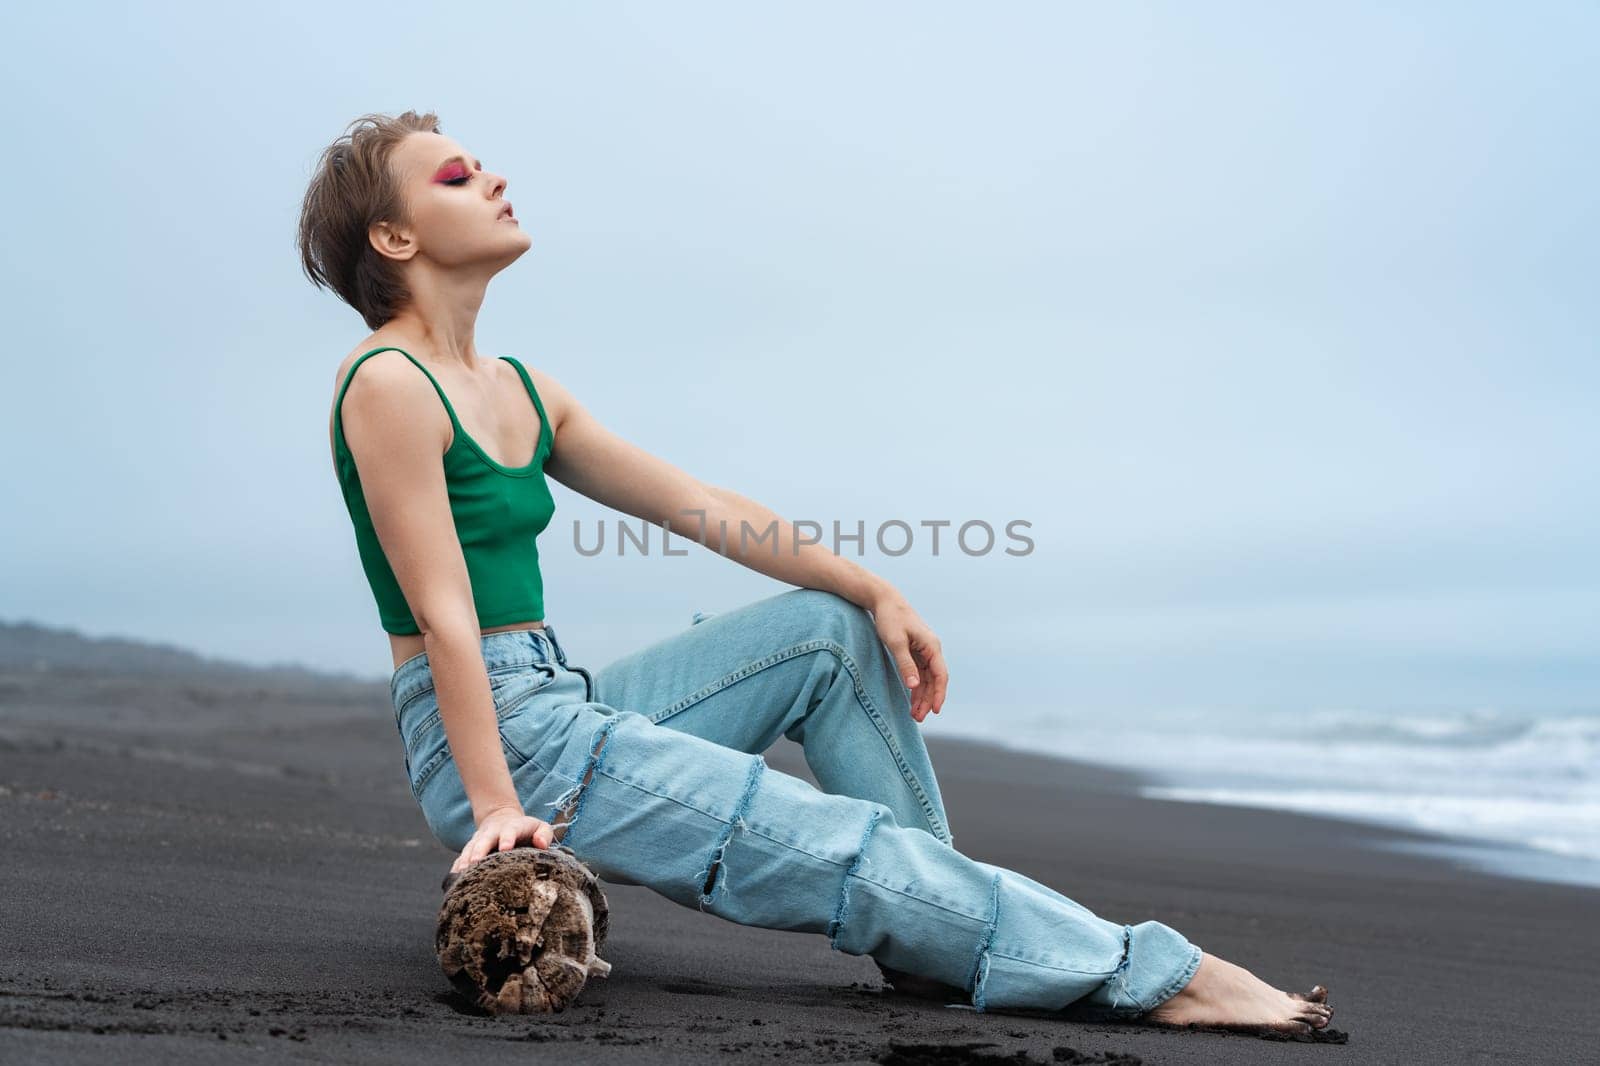 Awesome hipster woman with eyes closed and relaxed expression looks like ultimate millennial tourist. Blonde wearing green top and blue jeans, leaning back on log on black sandy beach of Pacific Ocean